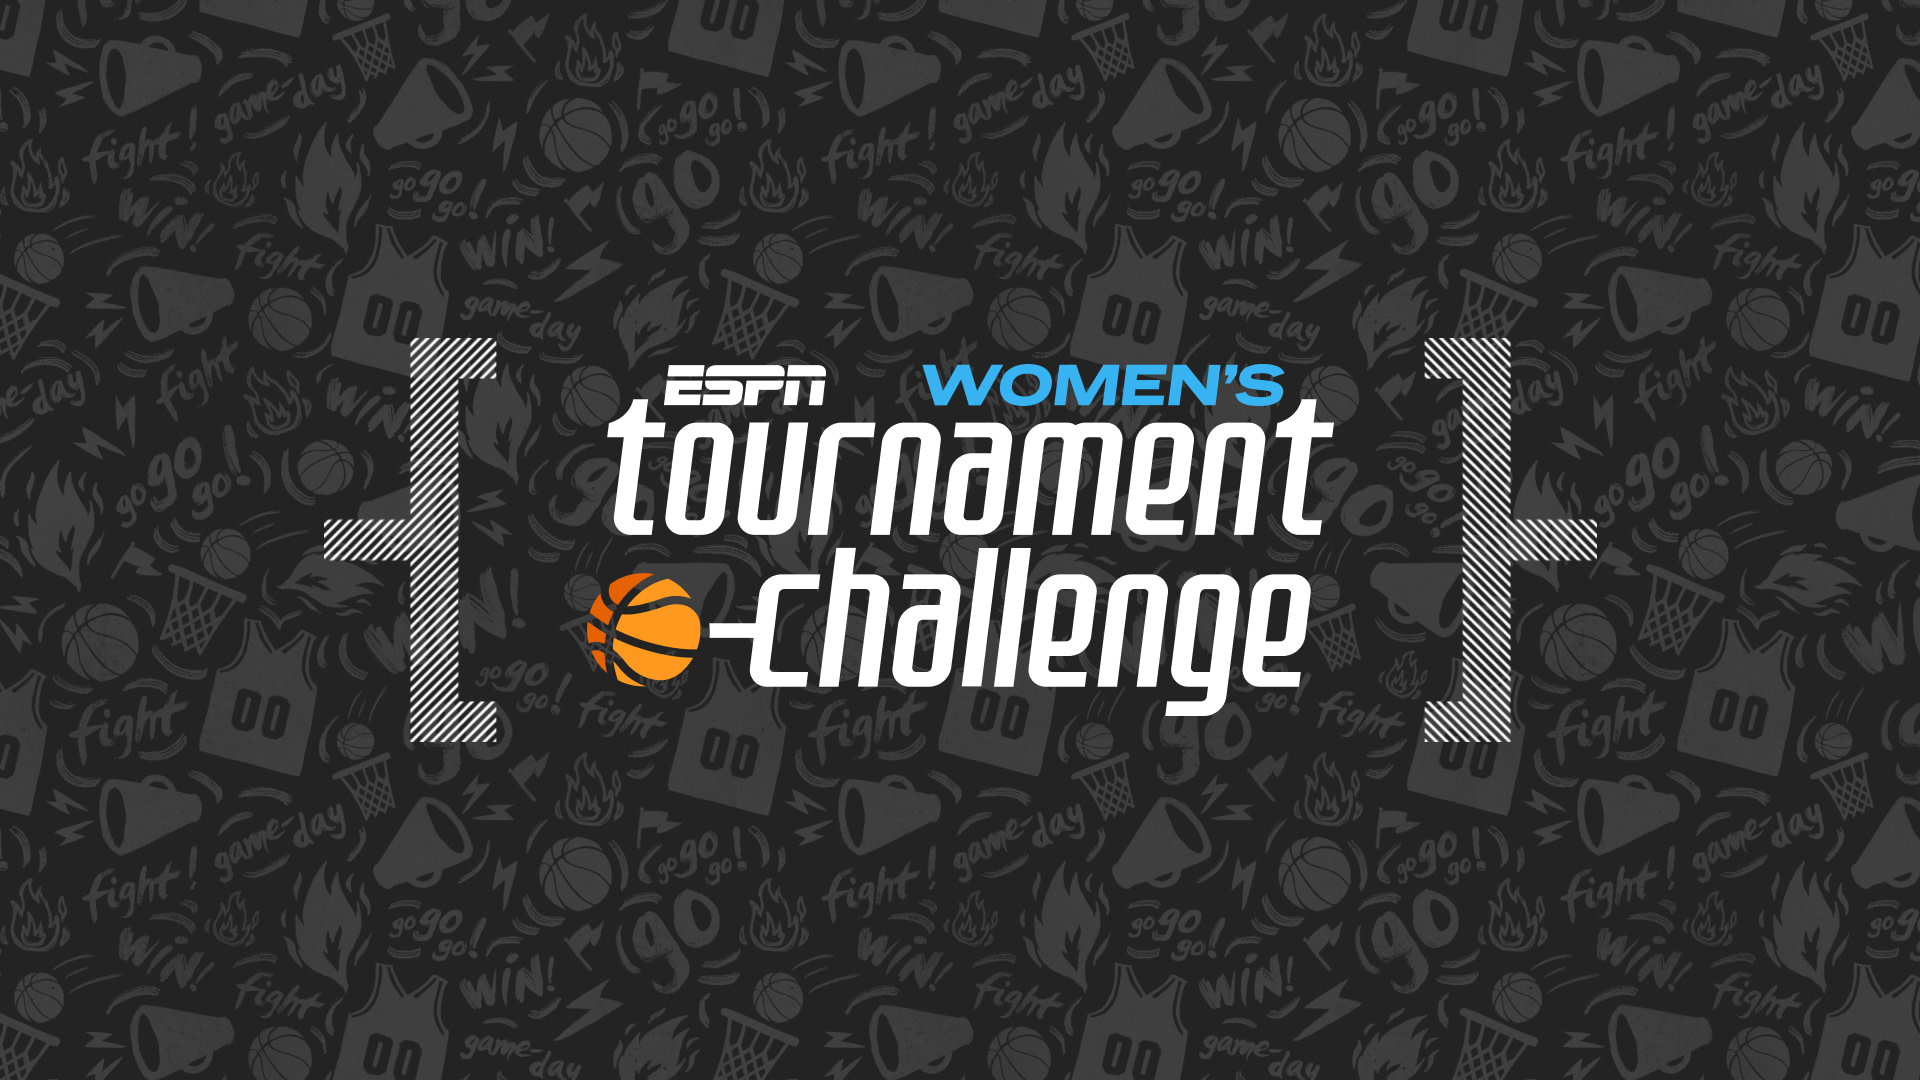 They&#8217;re coming in hot: Five teams on fire heading into the women&#8217;s NCAA tournament